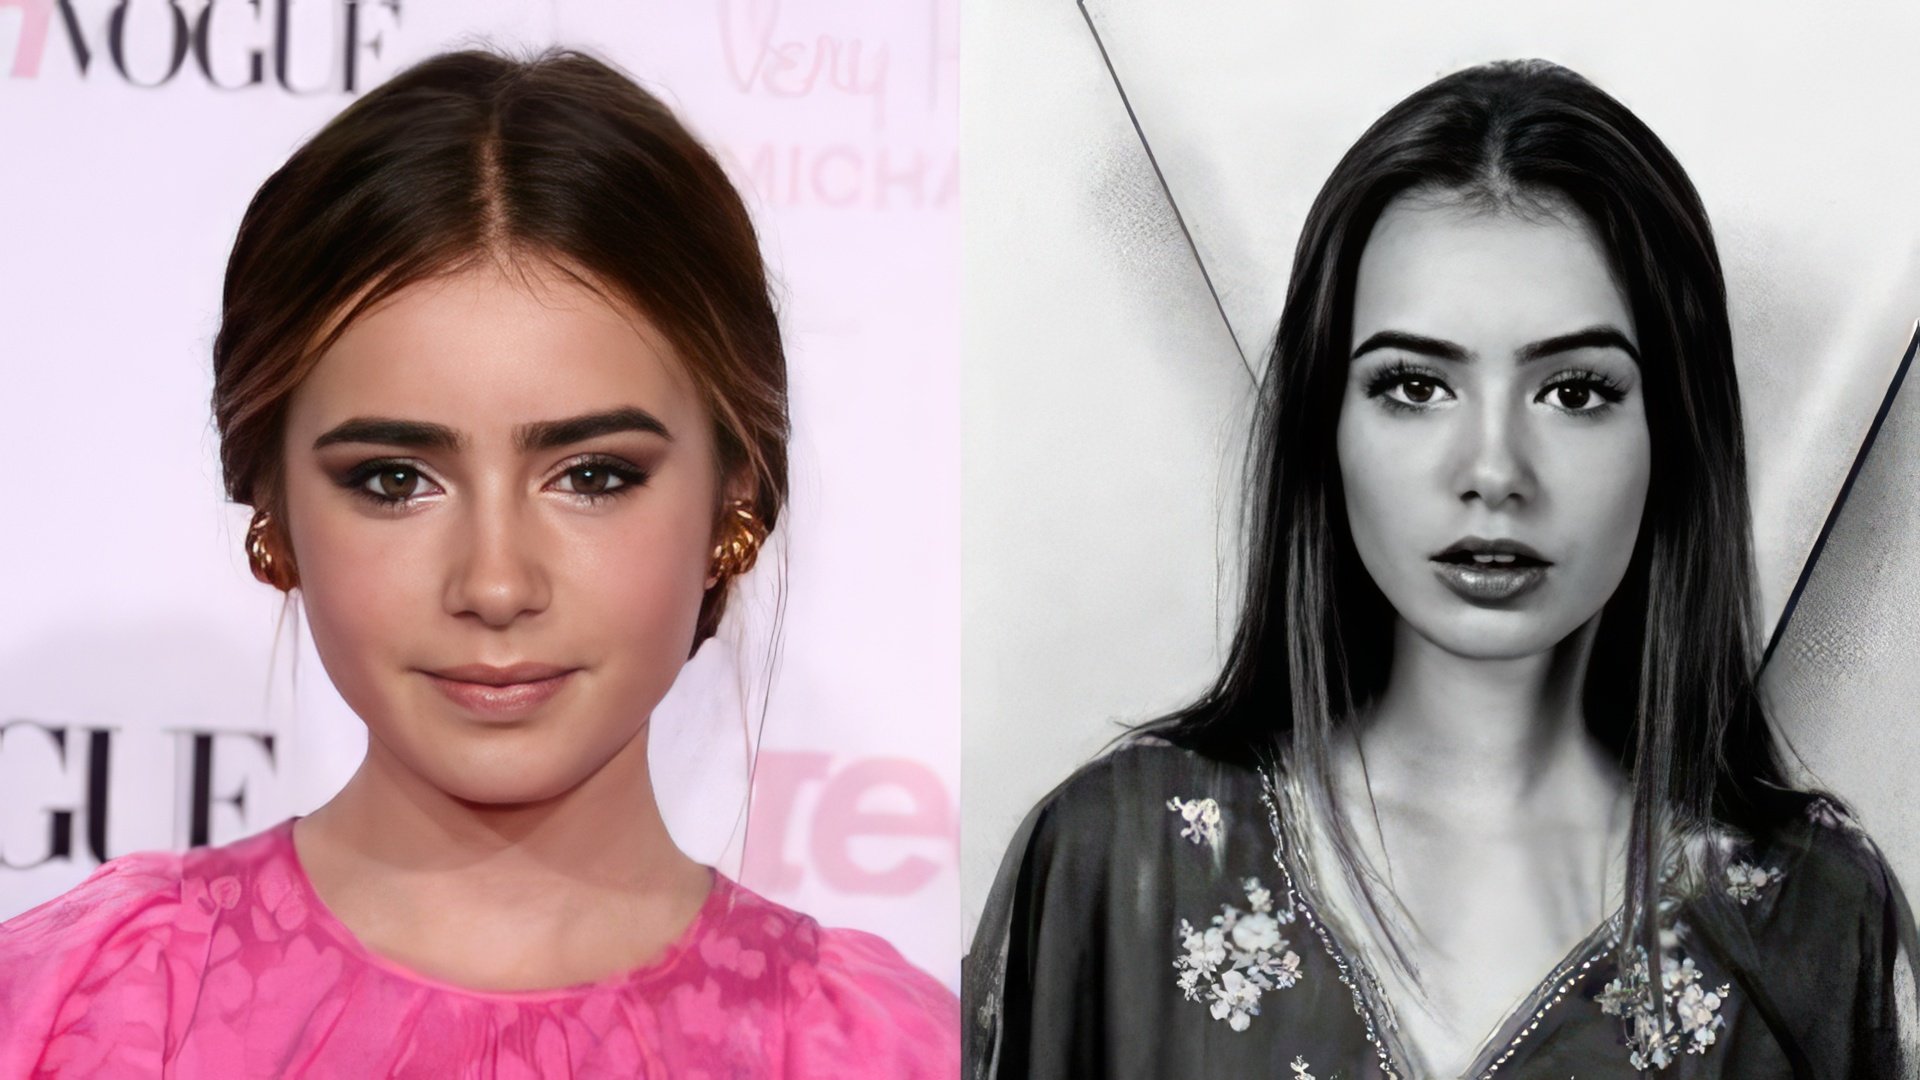 Lily Collins made a loud statement in the fashion industry as a child